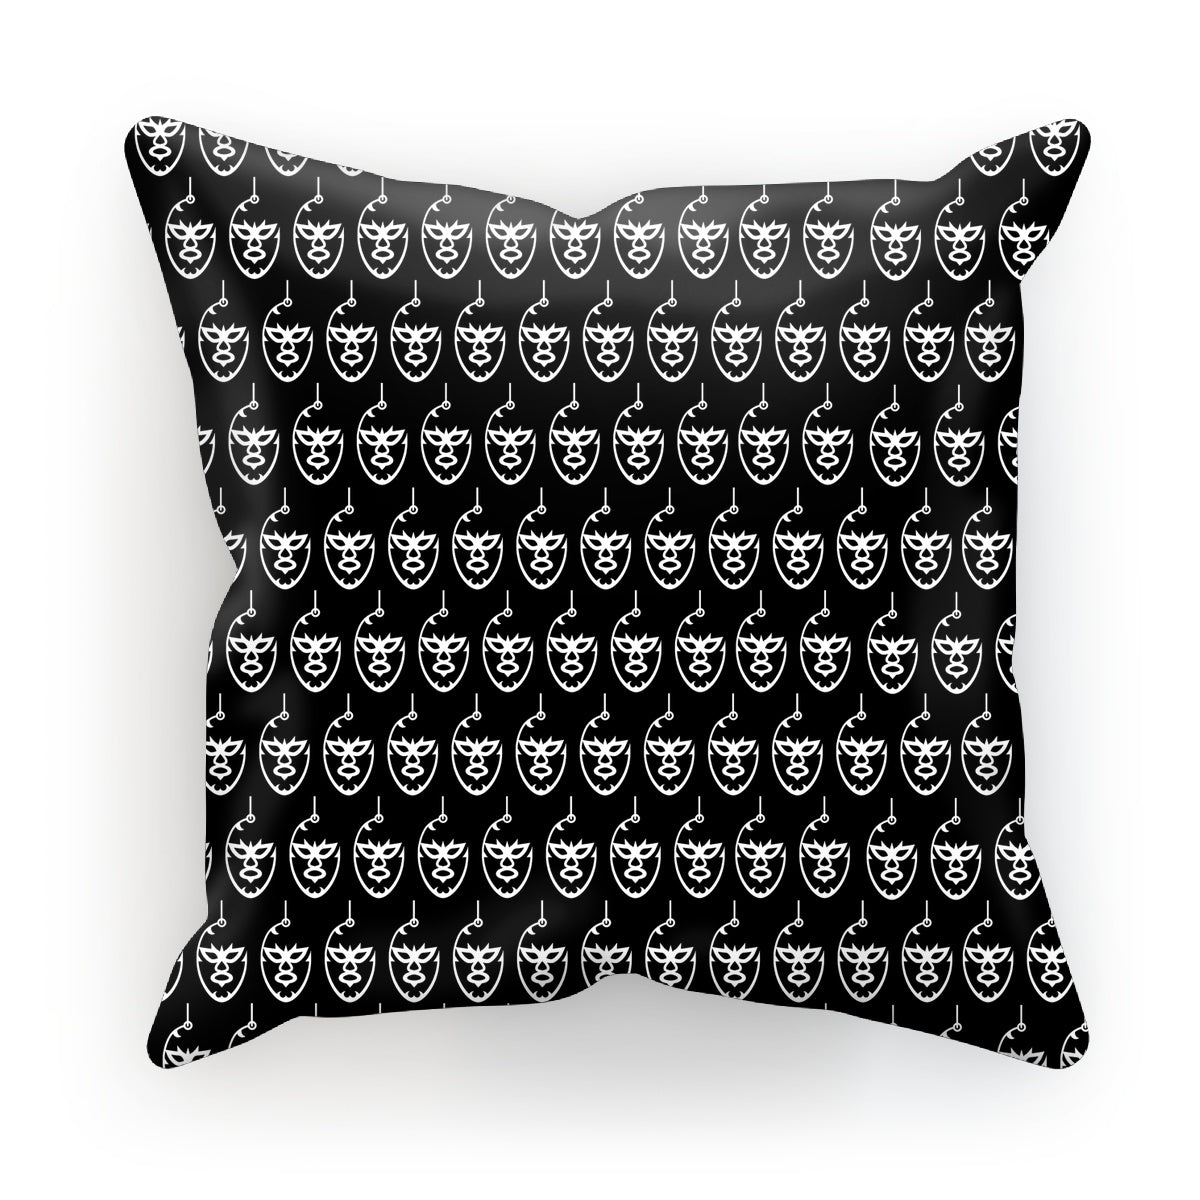 H.O.W Totally Hooked Cushion